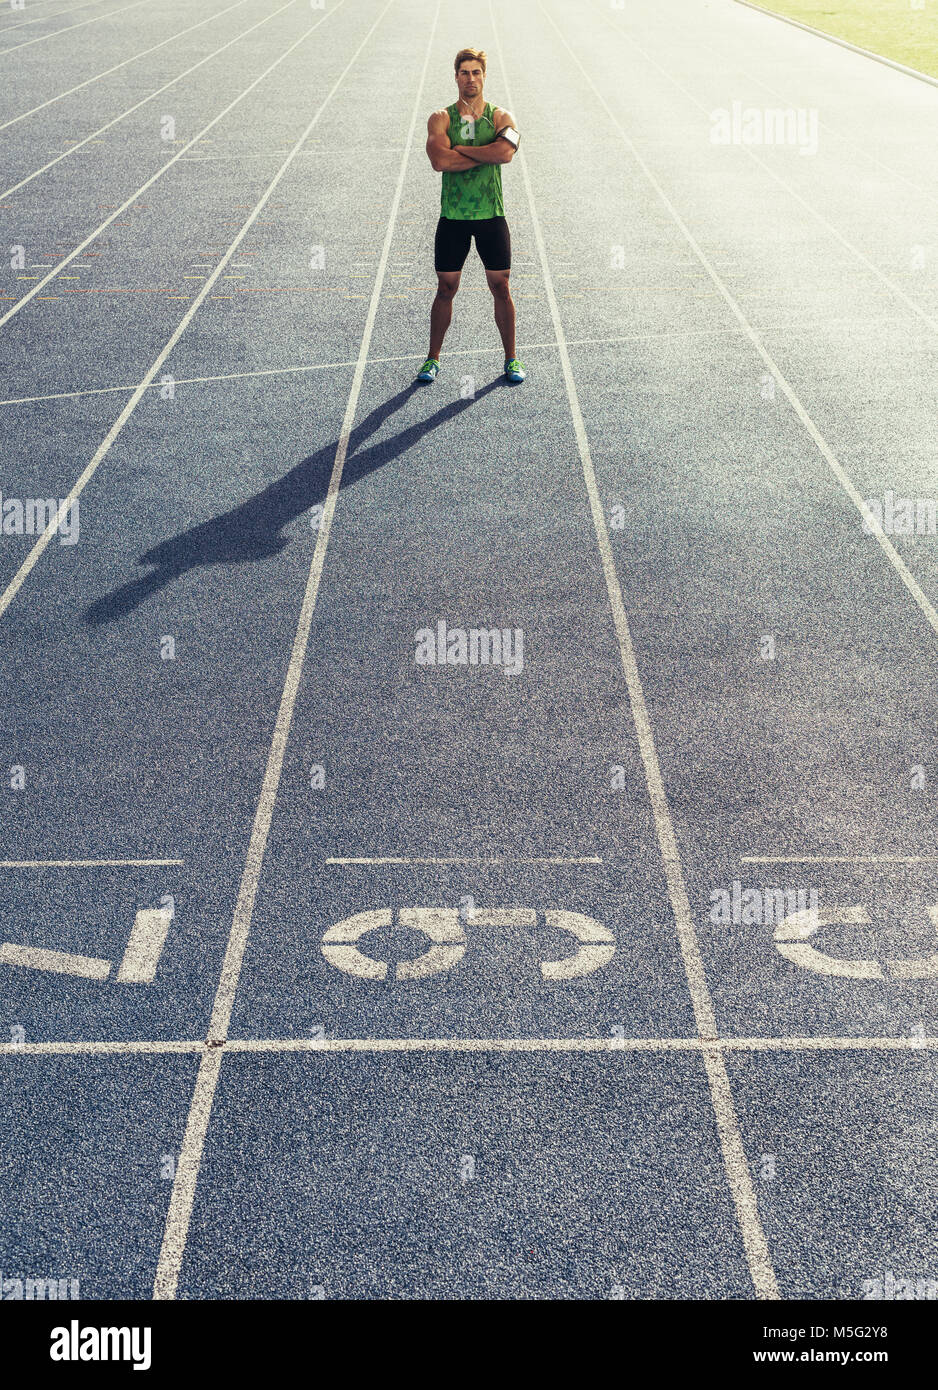 Runner standing on running track with hands folded. Athlete wearing earphones with mobile phone fixed in arm band. Stock Photo